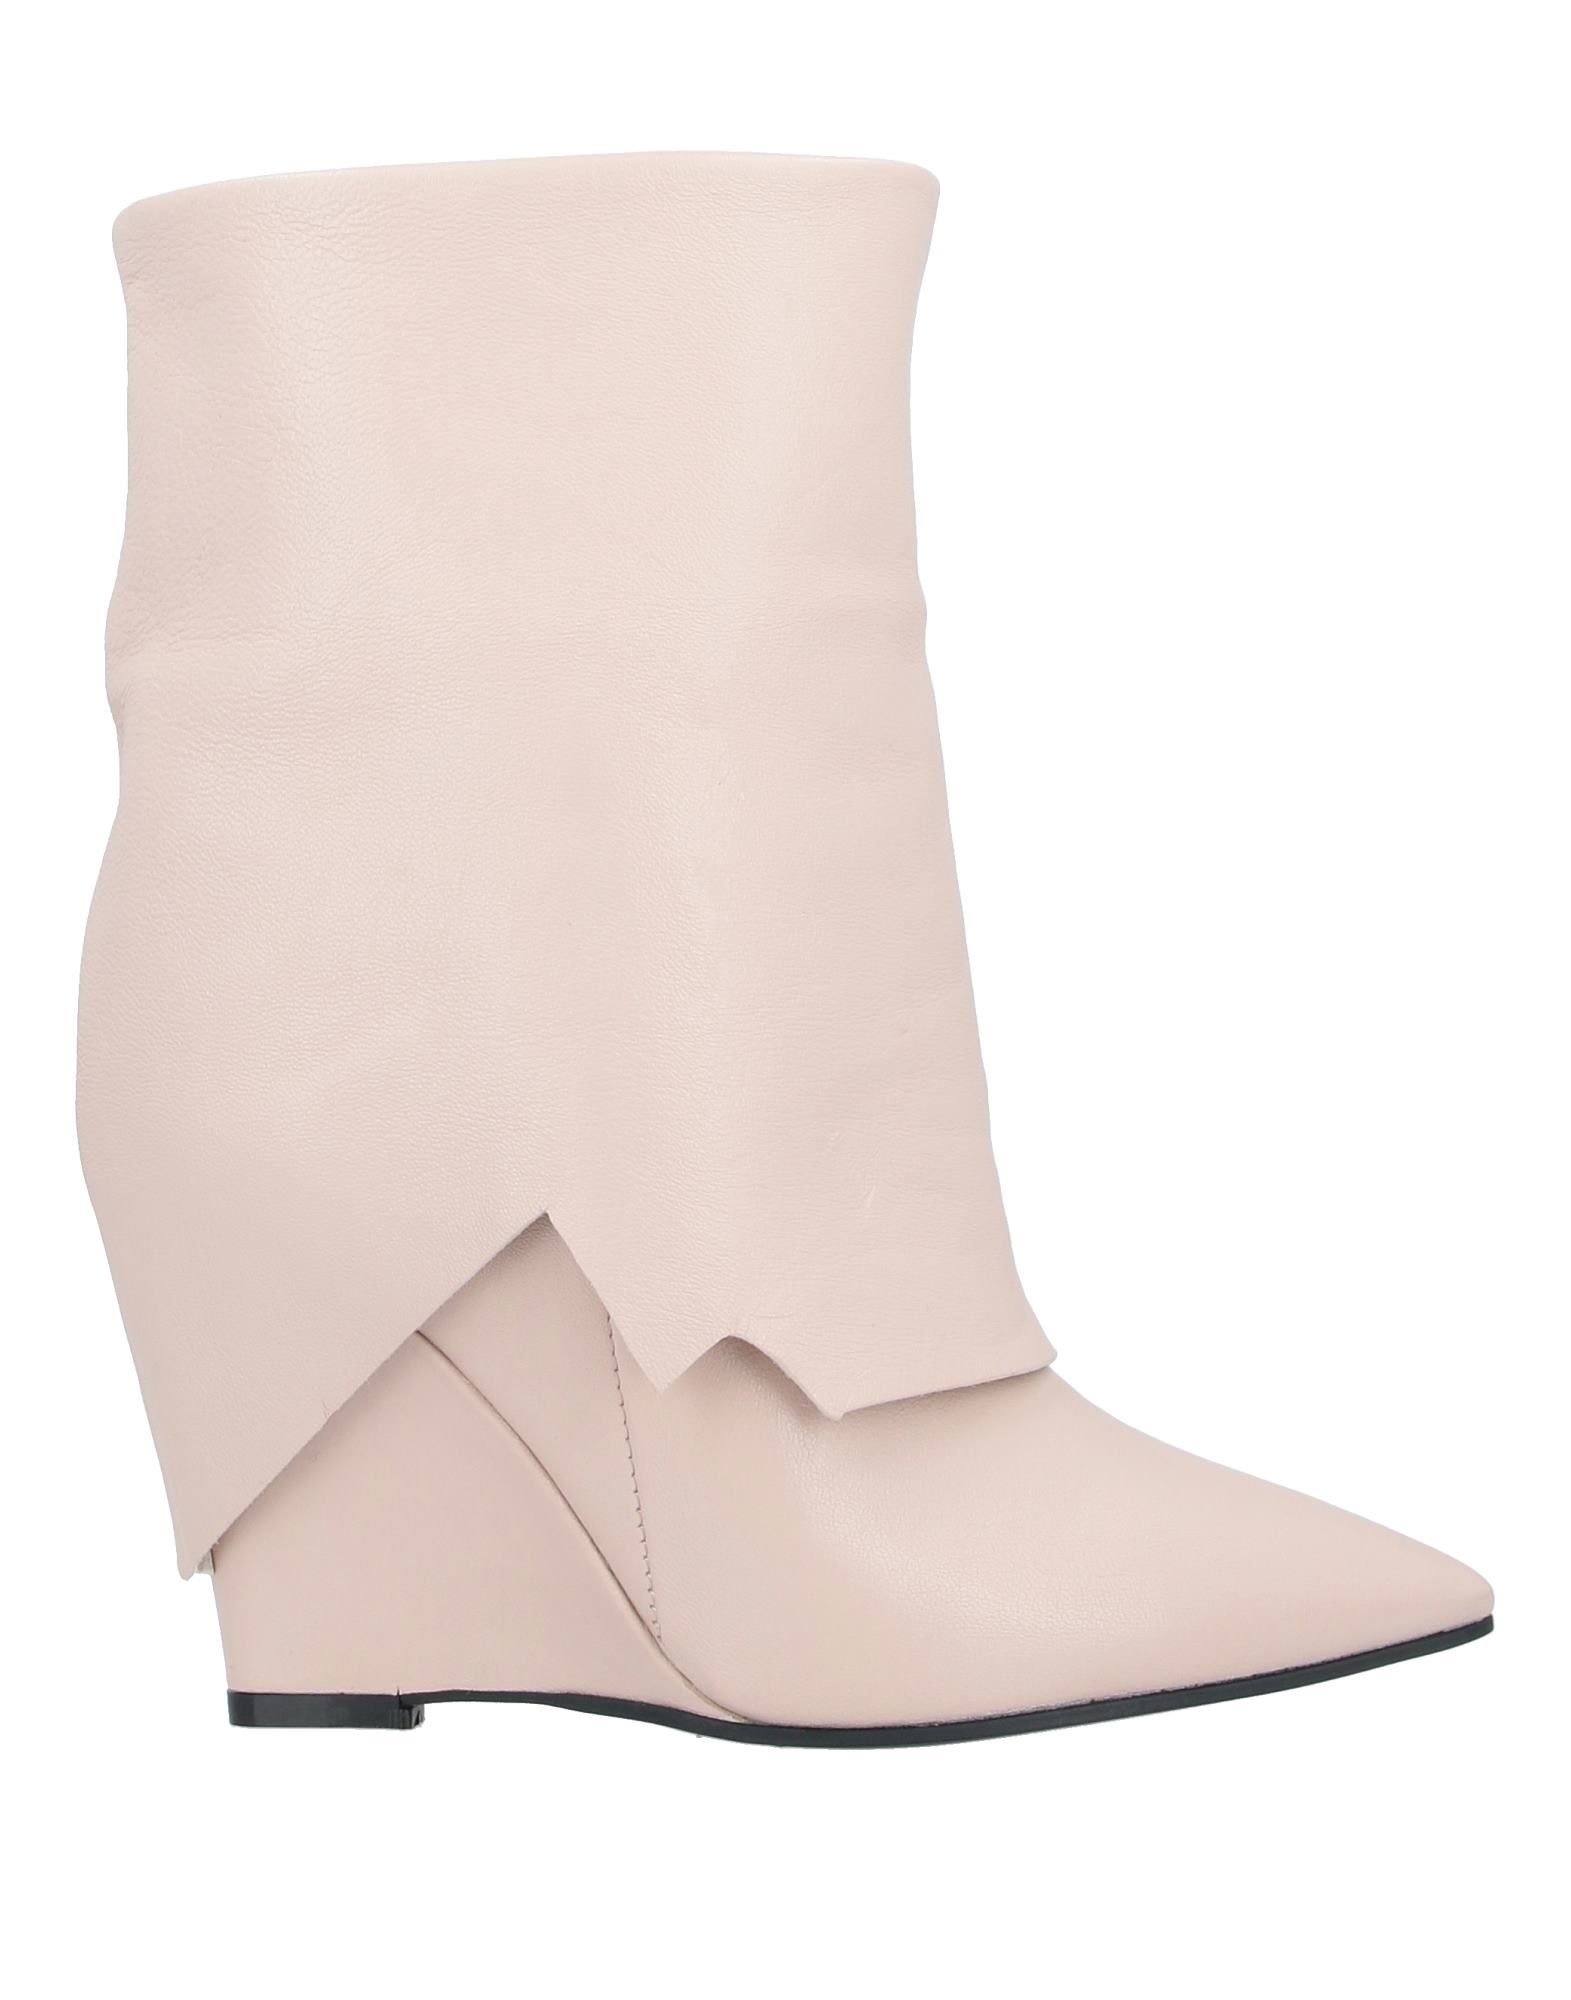 Islo Isabella Lorusso Ankle Boots In Light Pink